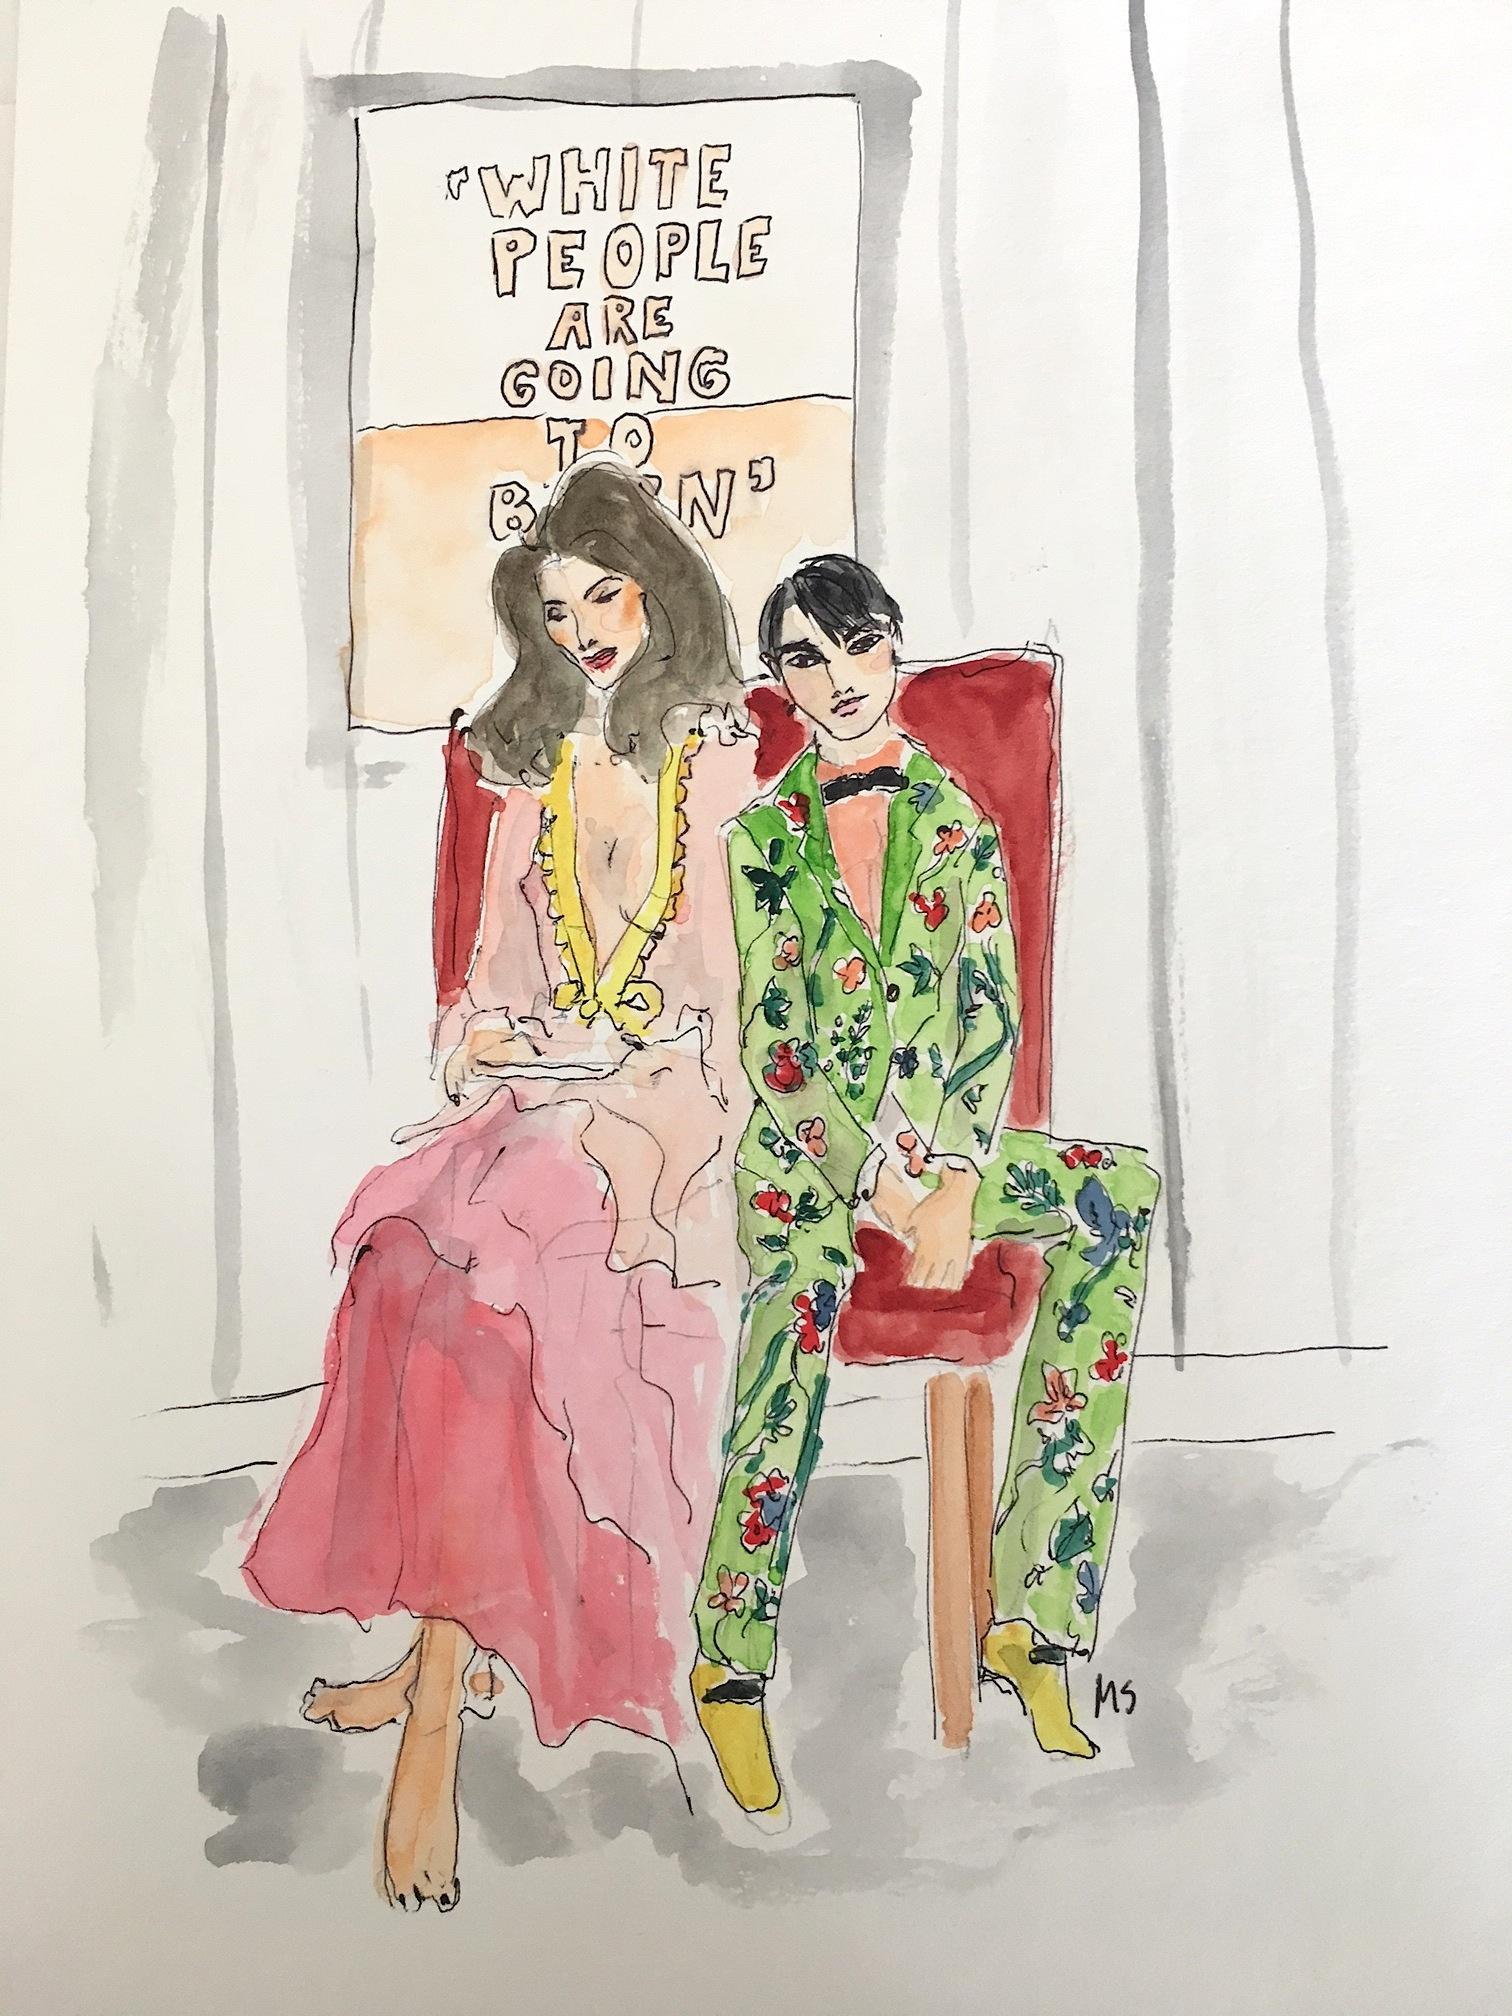 Manuel Santelices Figurative Art - Stephanie Seymour and Harry Brant. Watercolor on Archival Paper, 2017